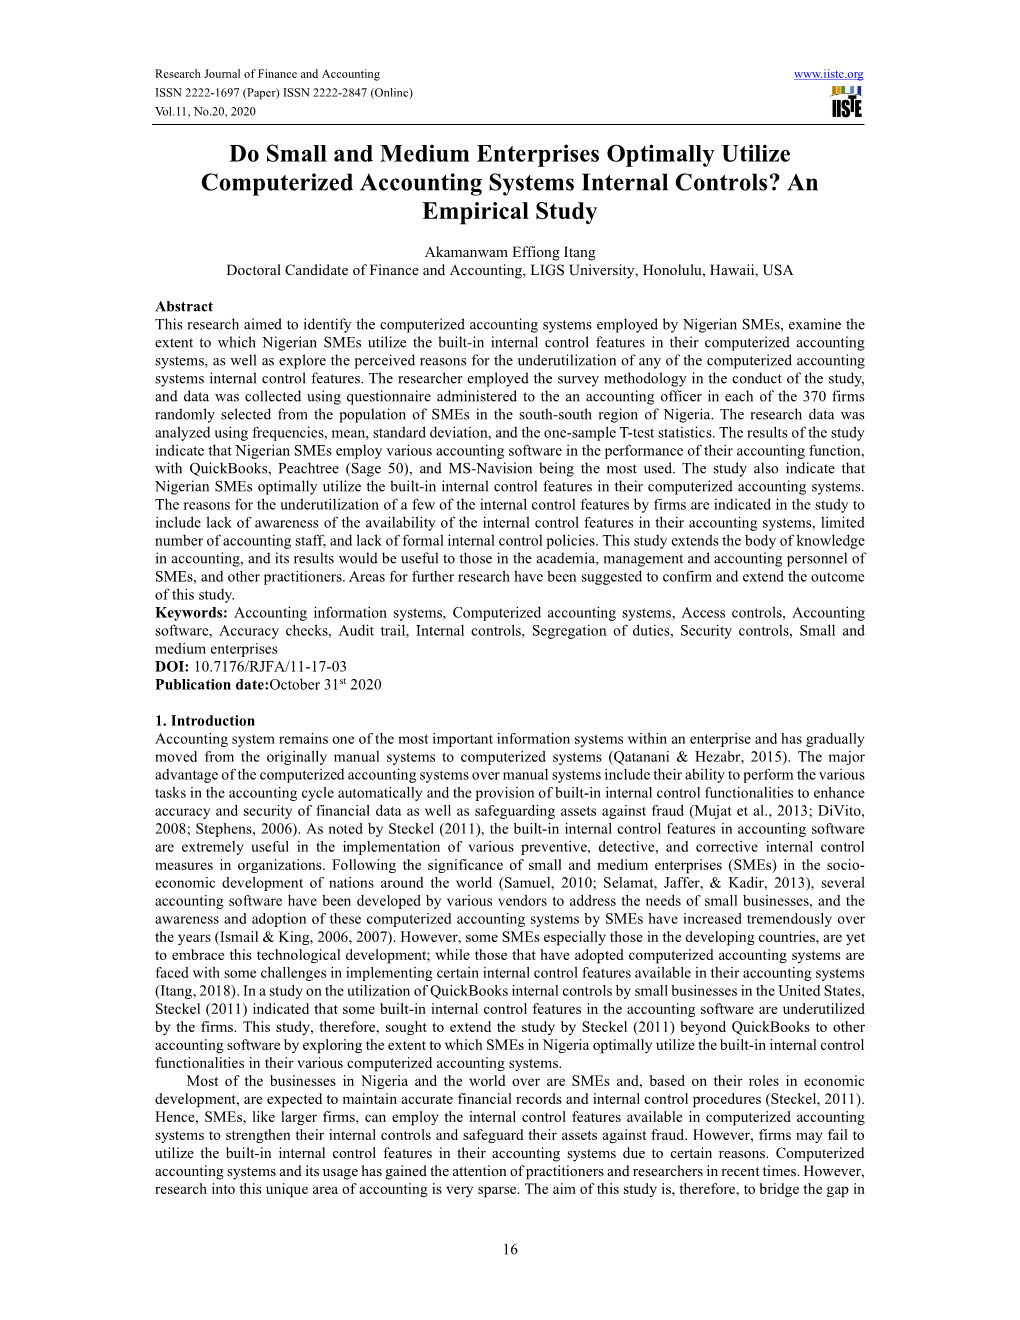 Do Small and Medium Enterprises Optimally Utilize Computerized Accounting Systems Internal Controls? an Empirical Study